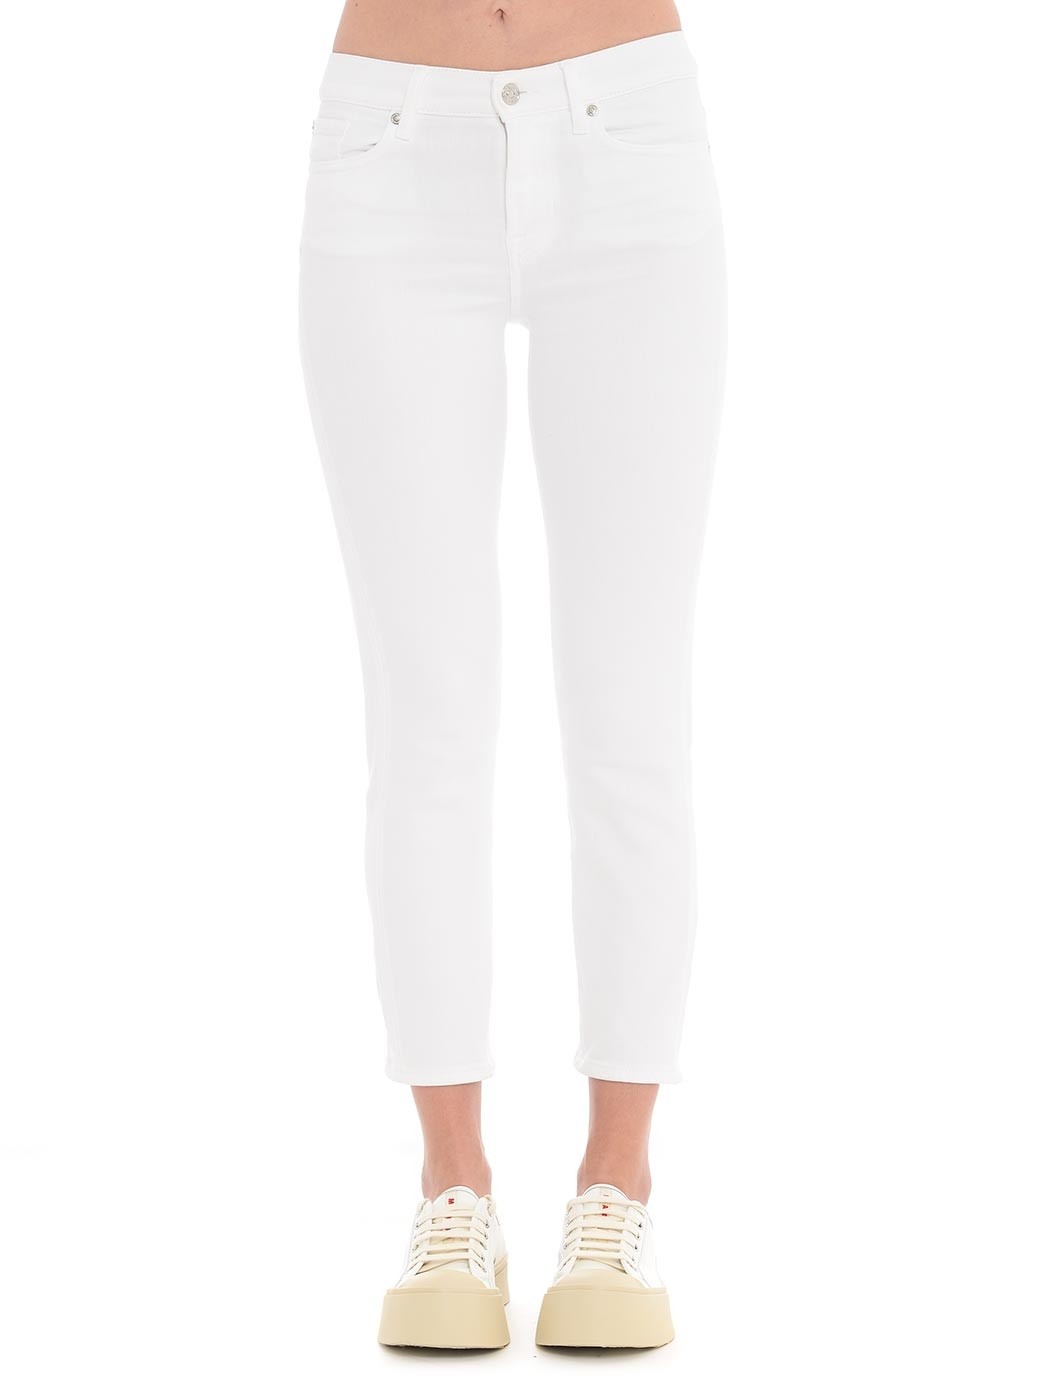  WOMENSWEAR,SPRING SUMMER COLLECTION  7 FOR ALL MANKIND JSVYC140